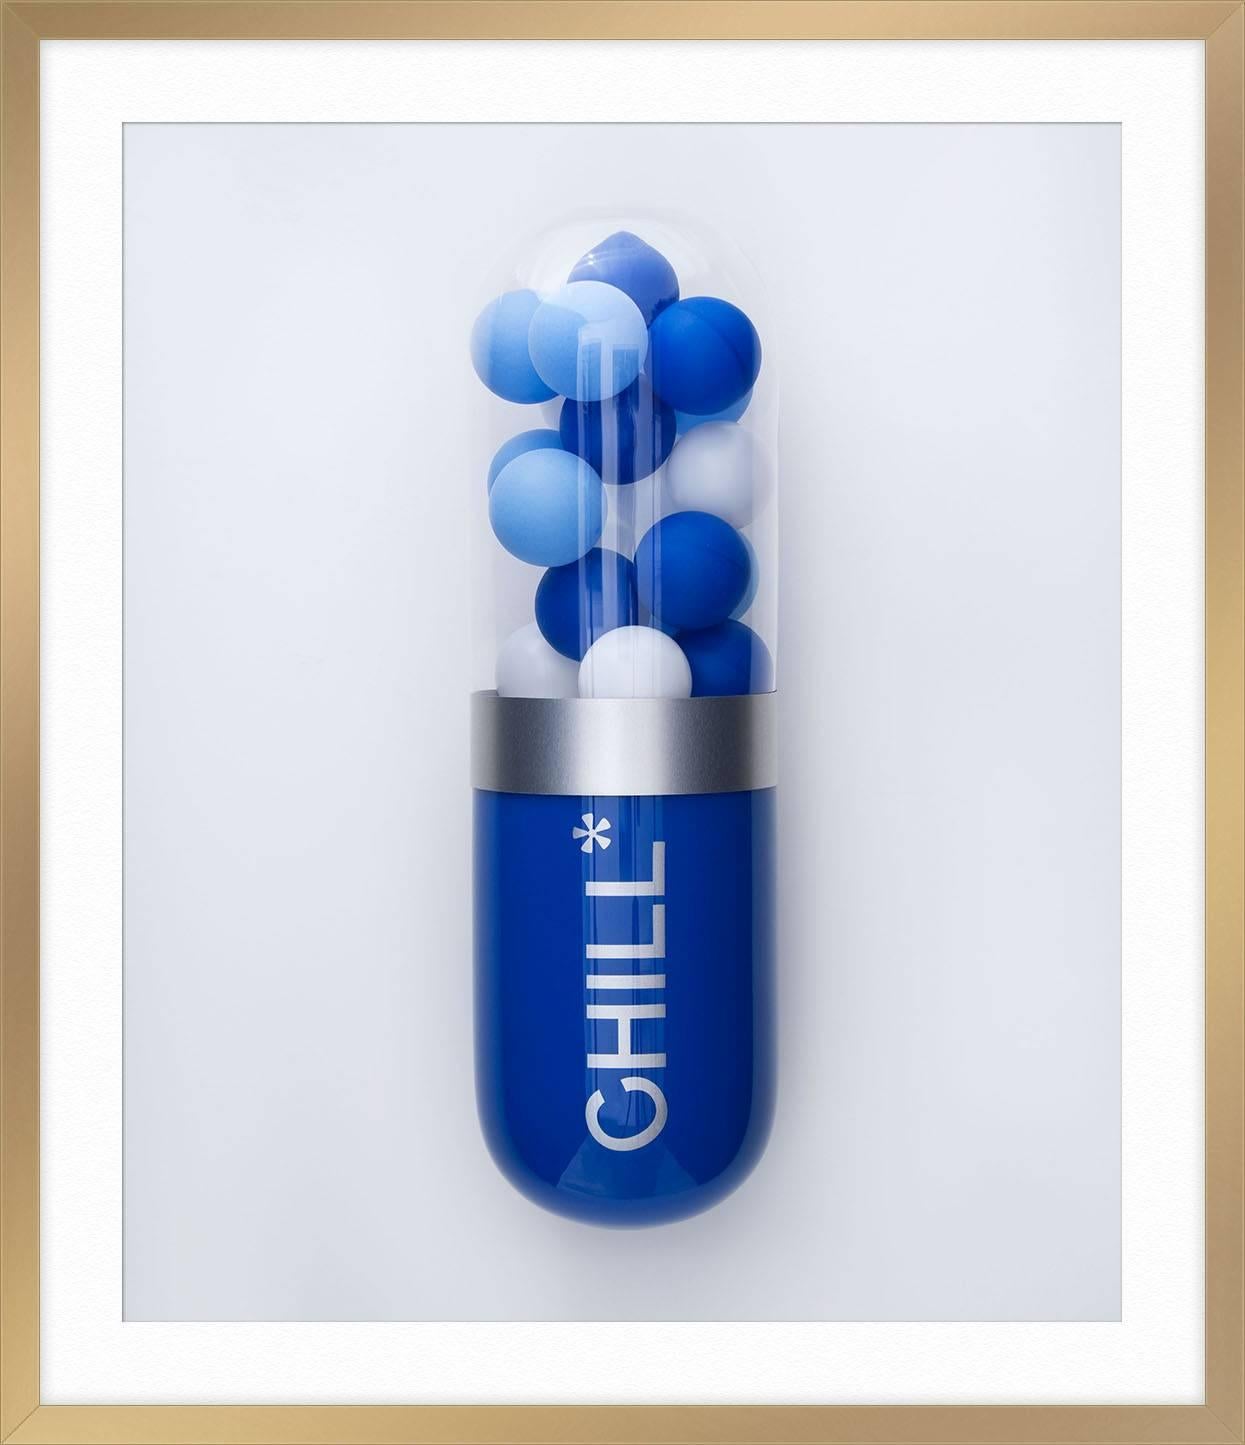 BLTC: Chill* - Limited Edition Print 5